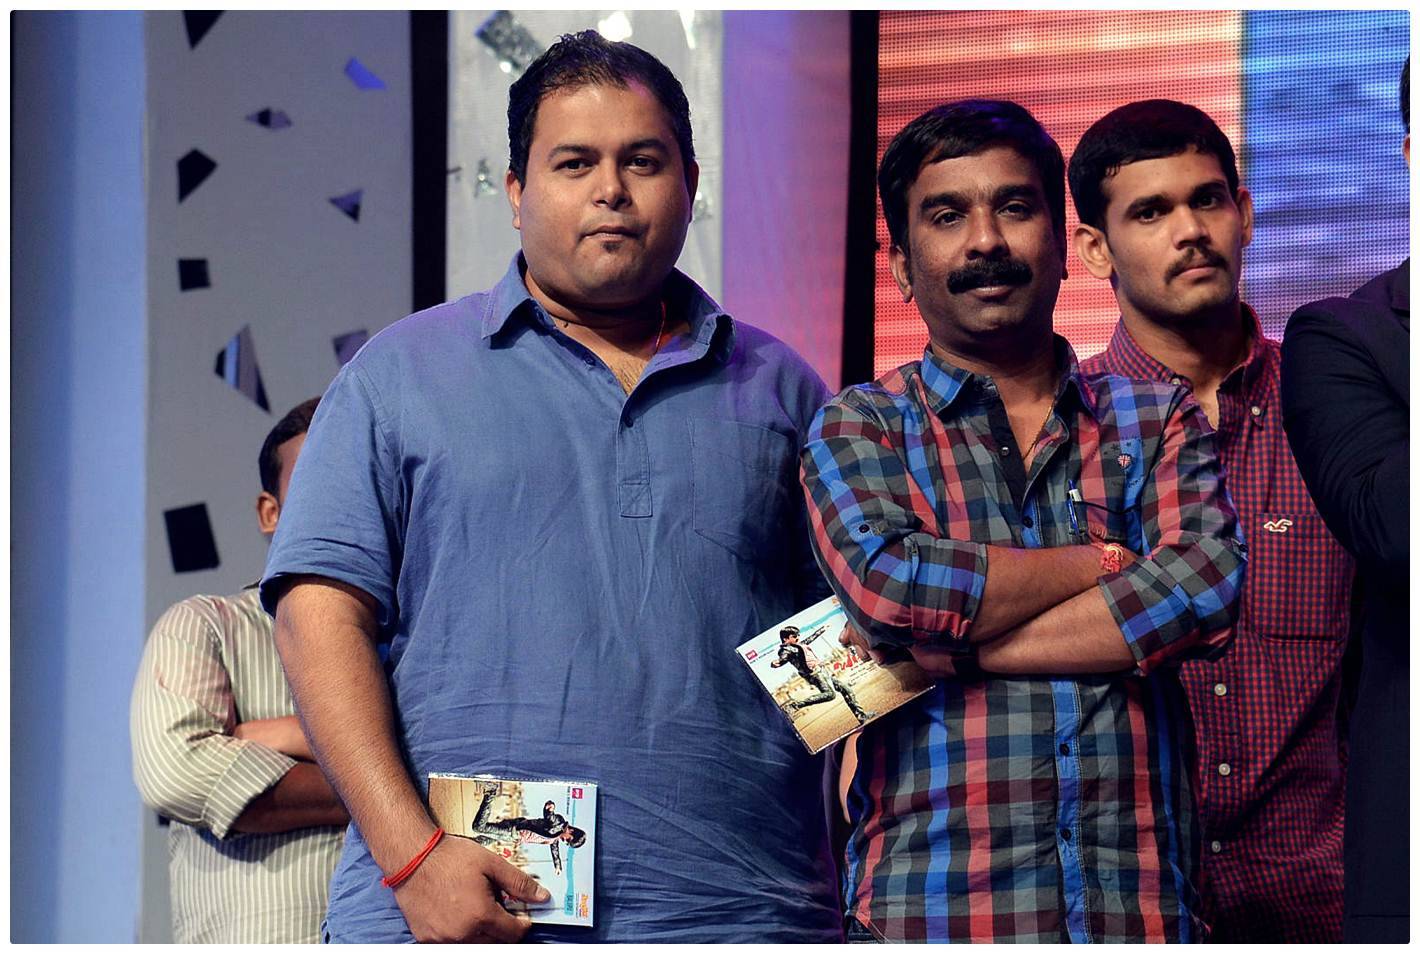 Balupu Audio Release Function Photos | Picture 471055